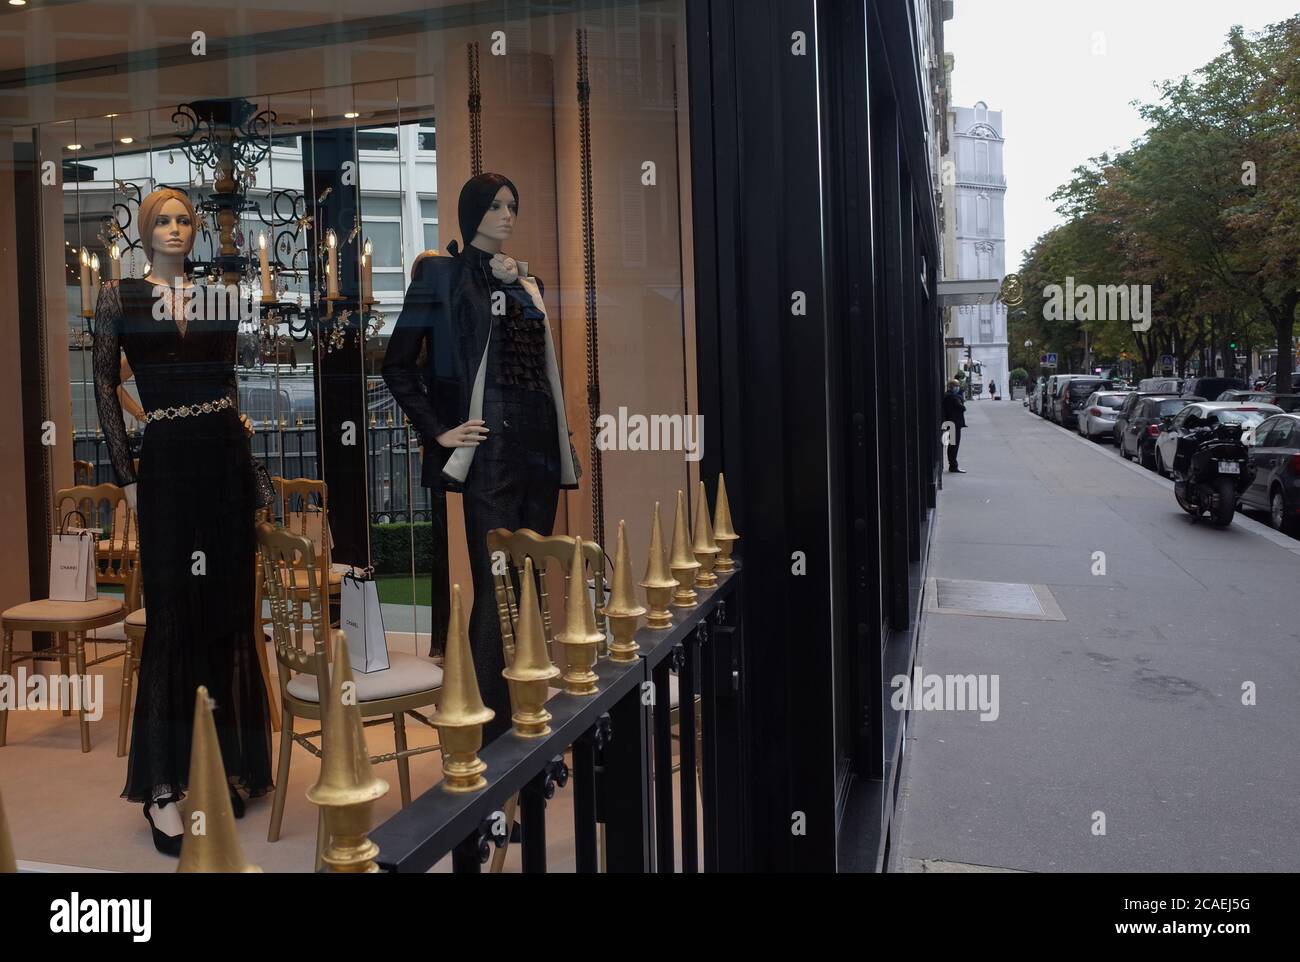 The Louis Vuitton Moet Hennessy store on Avenue Montaigne in Paris, on  Saturday May 1st, 2004. Photo by Laurent Zabulon/ABACA Stock Photo - Alamy